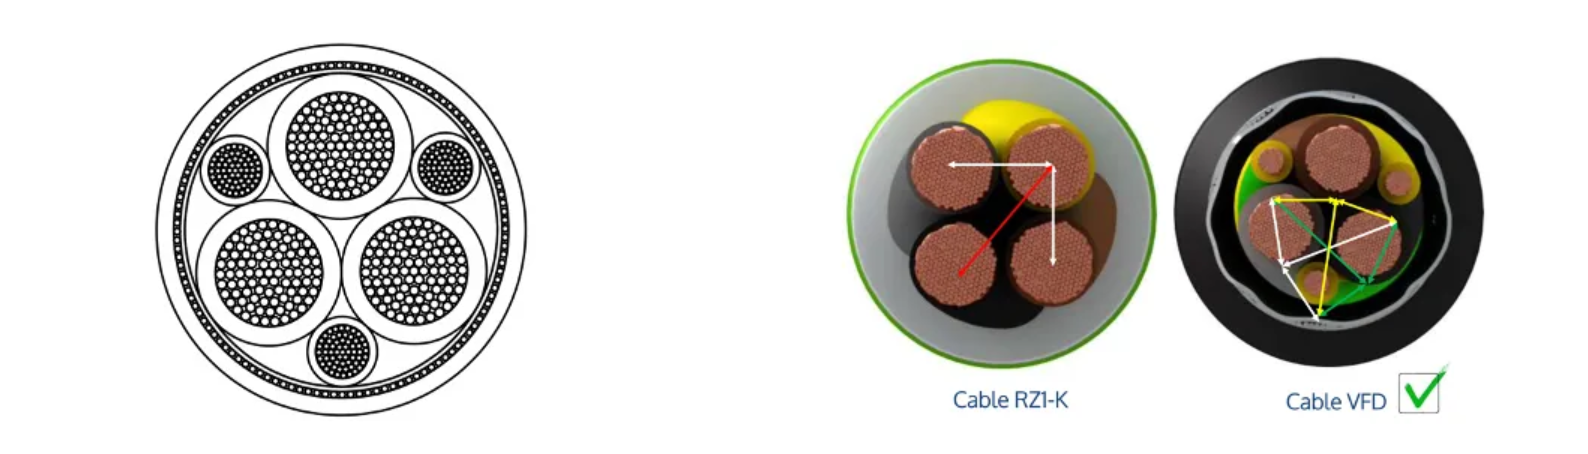 Top Cable Construction 2